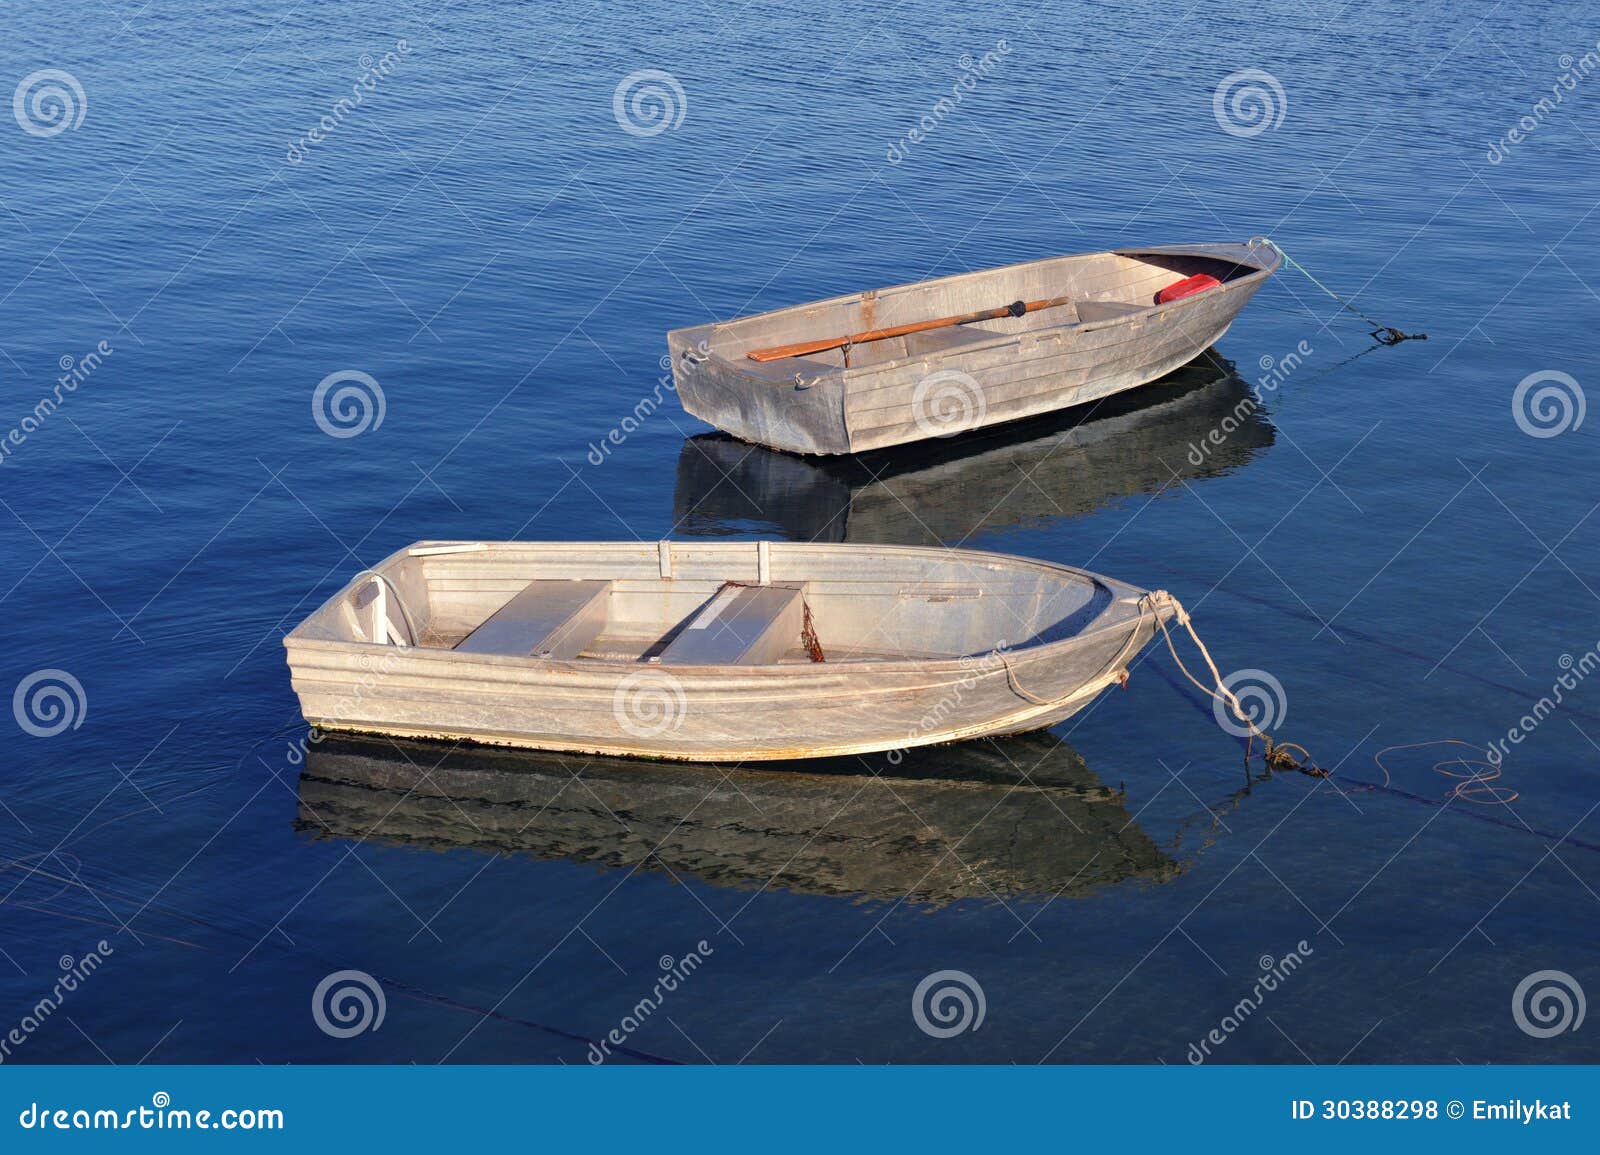 Two Small Boats Floating On River Stock Photo 1340221382, 60% OFF